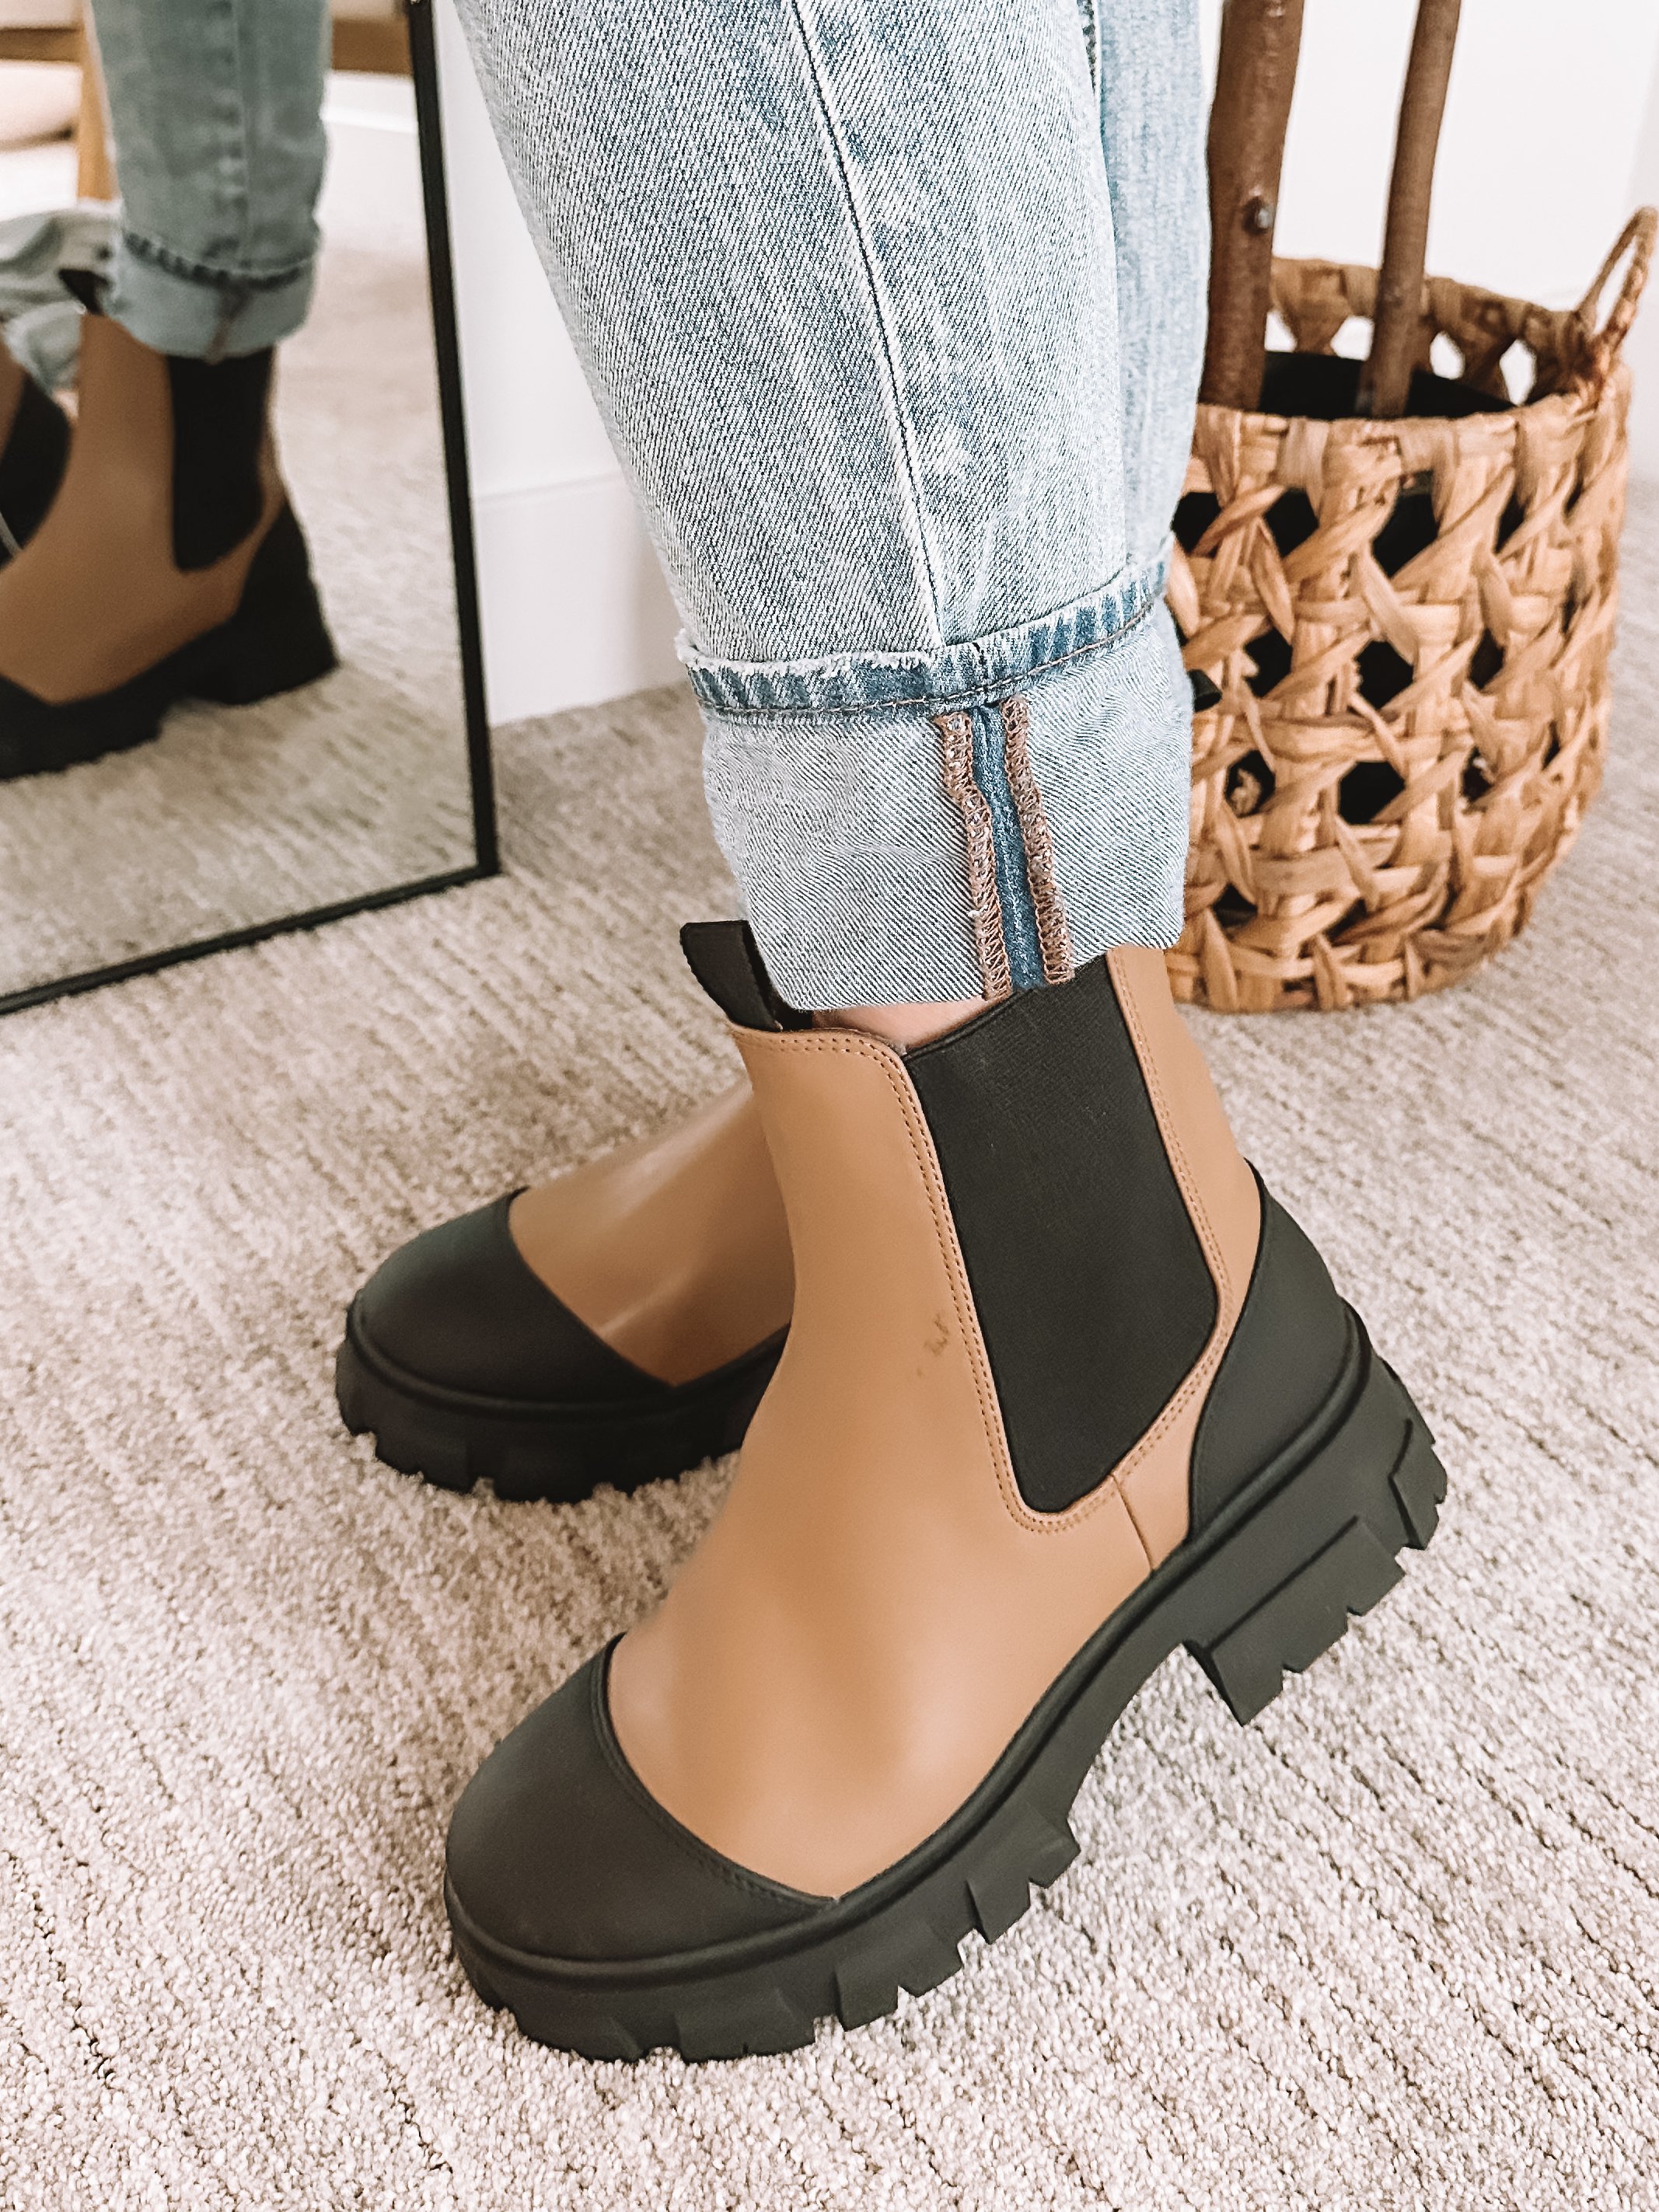 Target Boots - Tan and Black Chelsea Boots